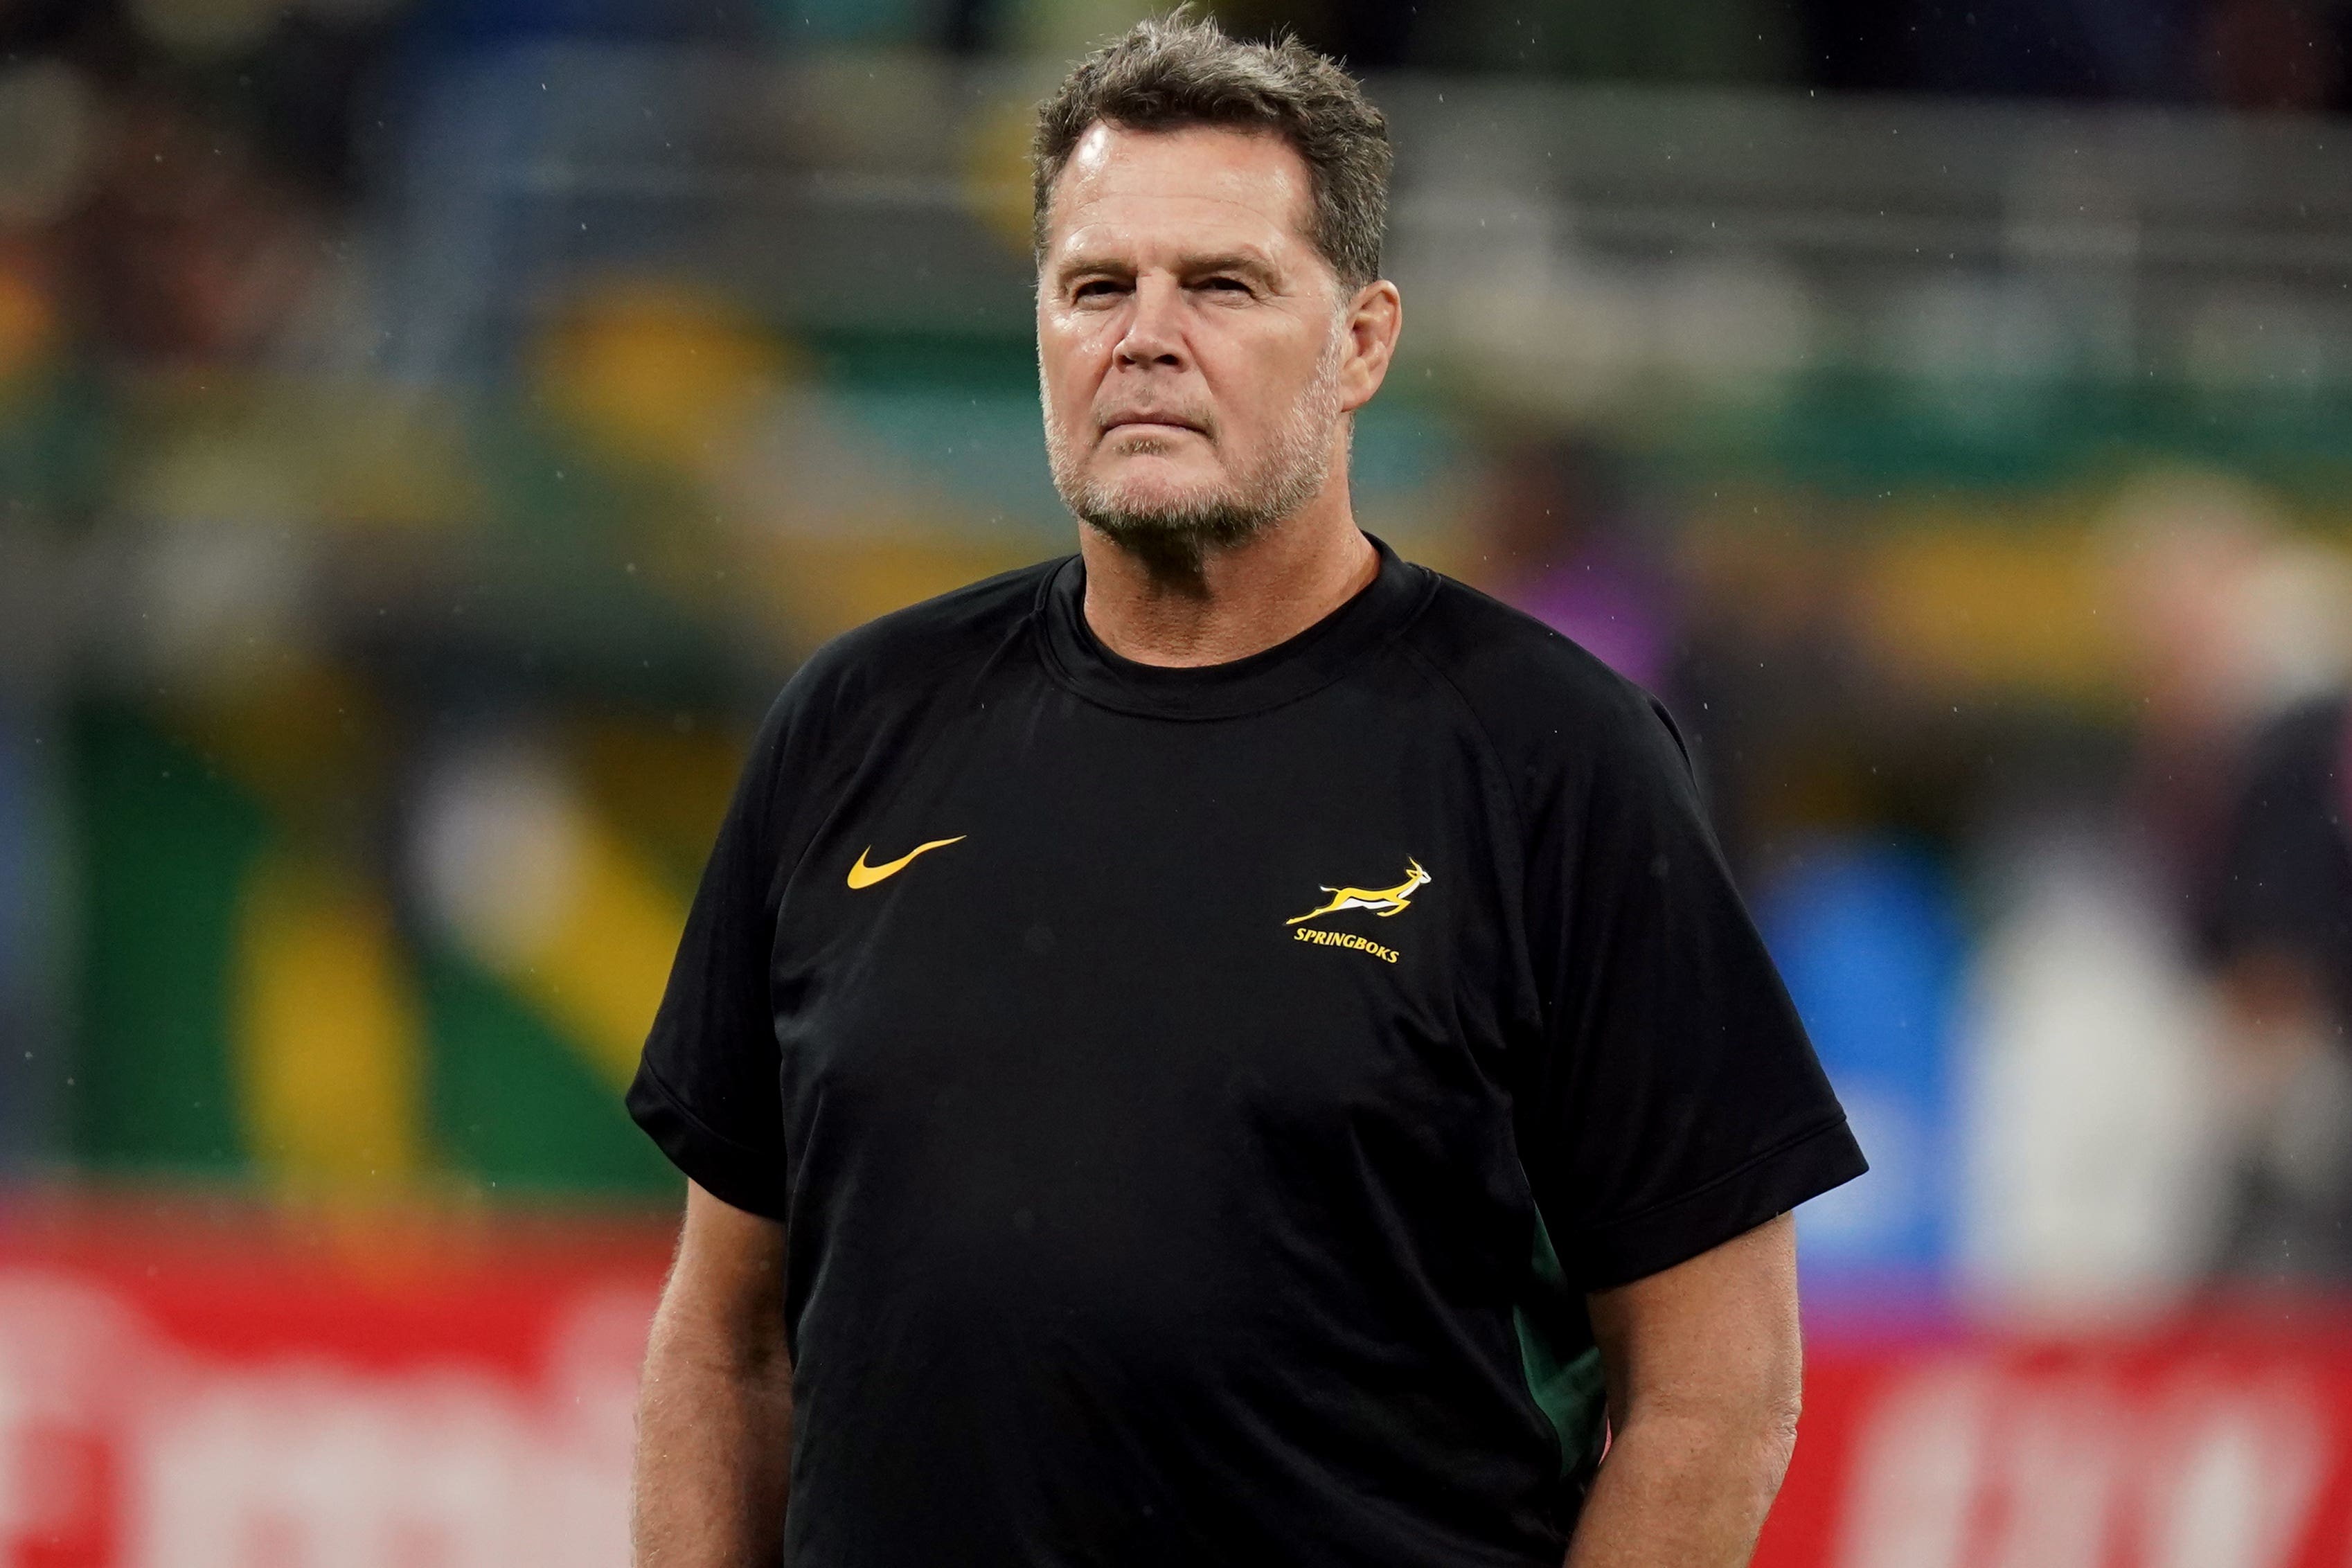 Rassie Erasmus has named his side for the first Test